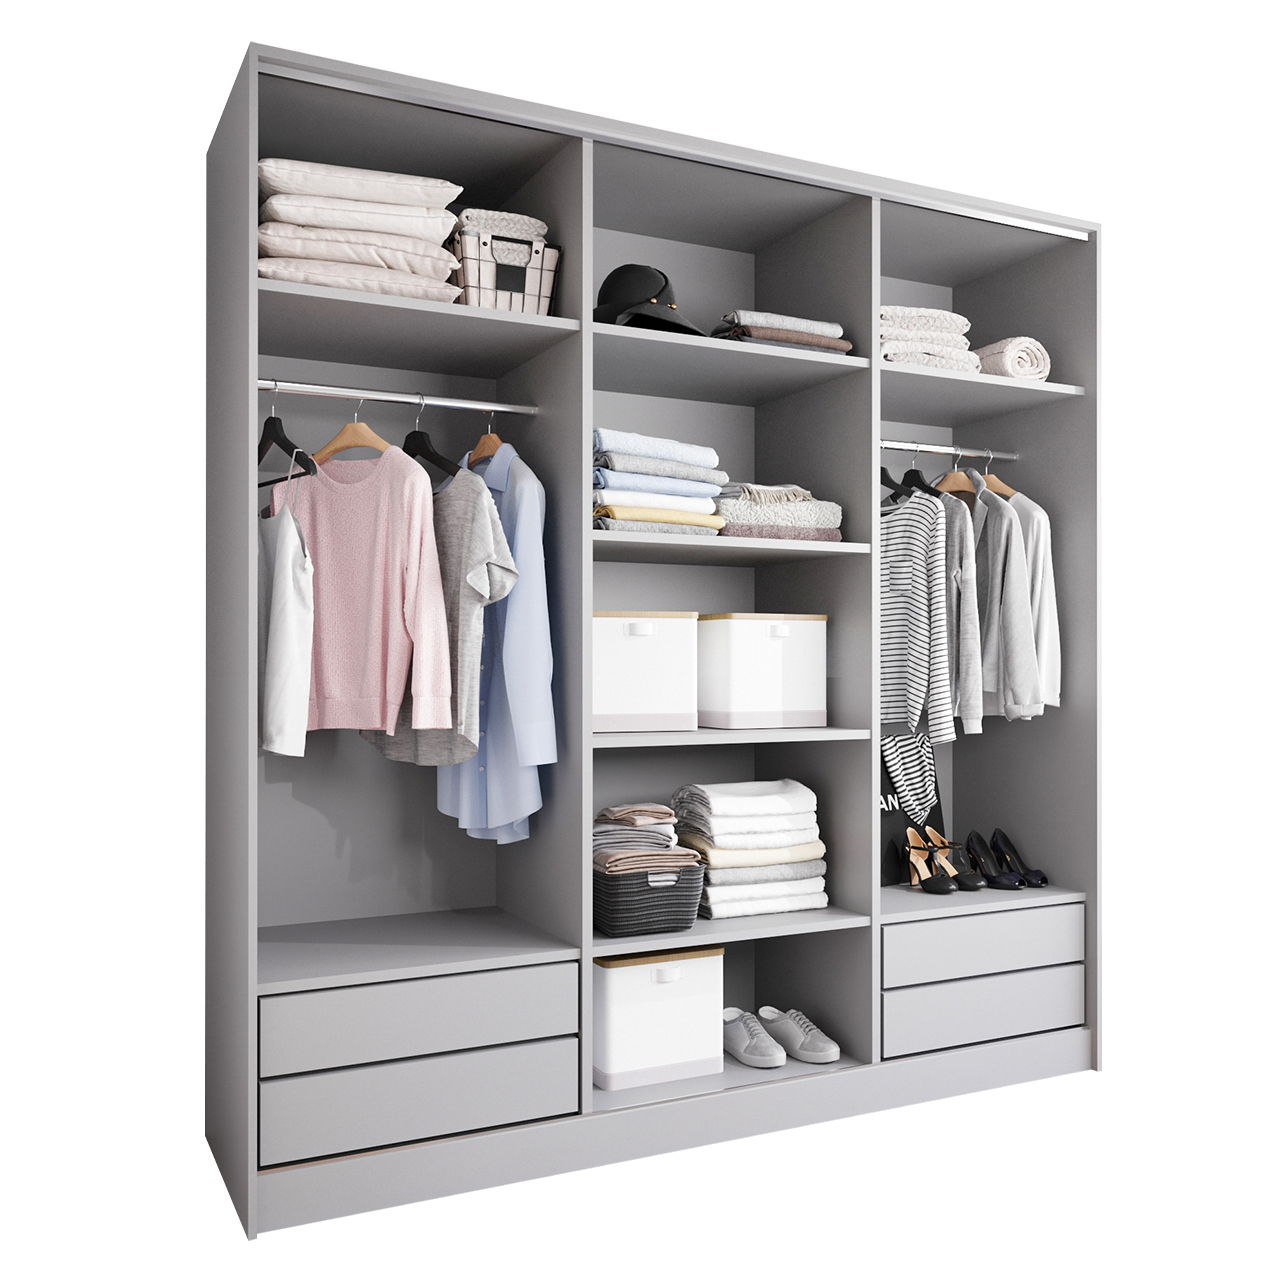 Sliding Wardrobe with Drawers BRITTO D 180 grey